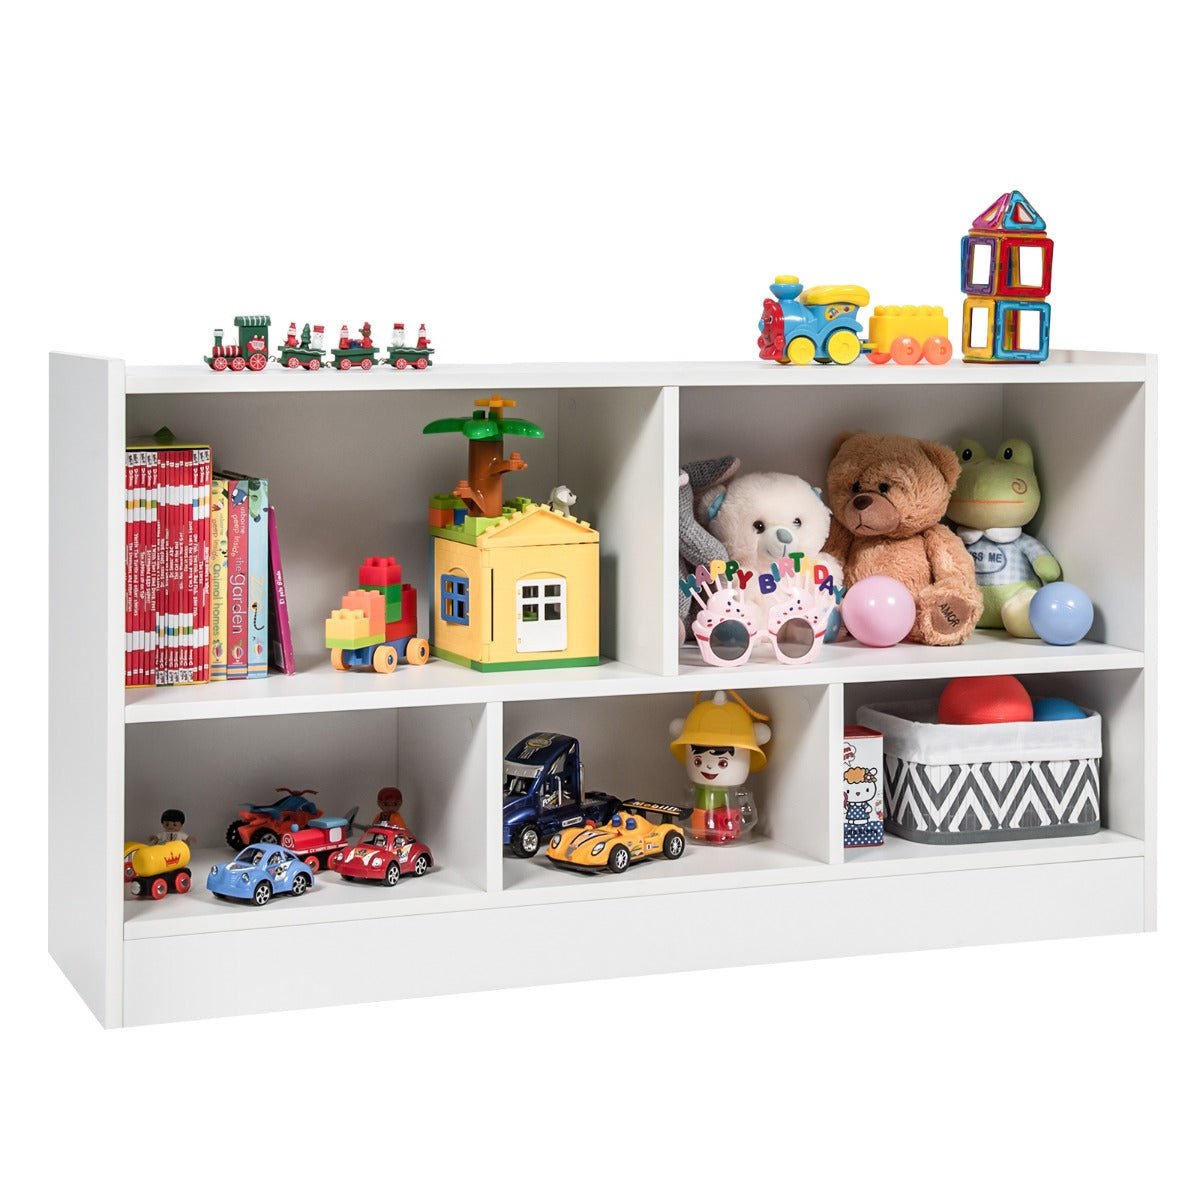 All-in-One Bookcase and Toy Organizer for Kids